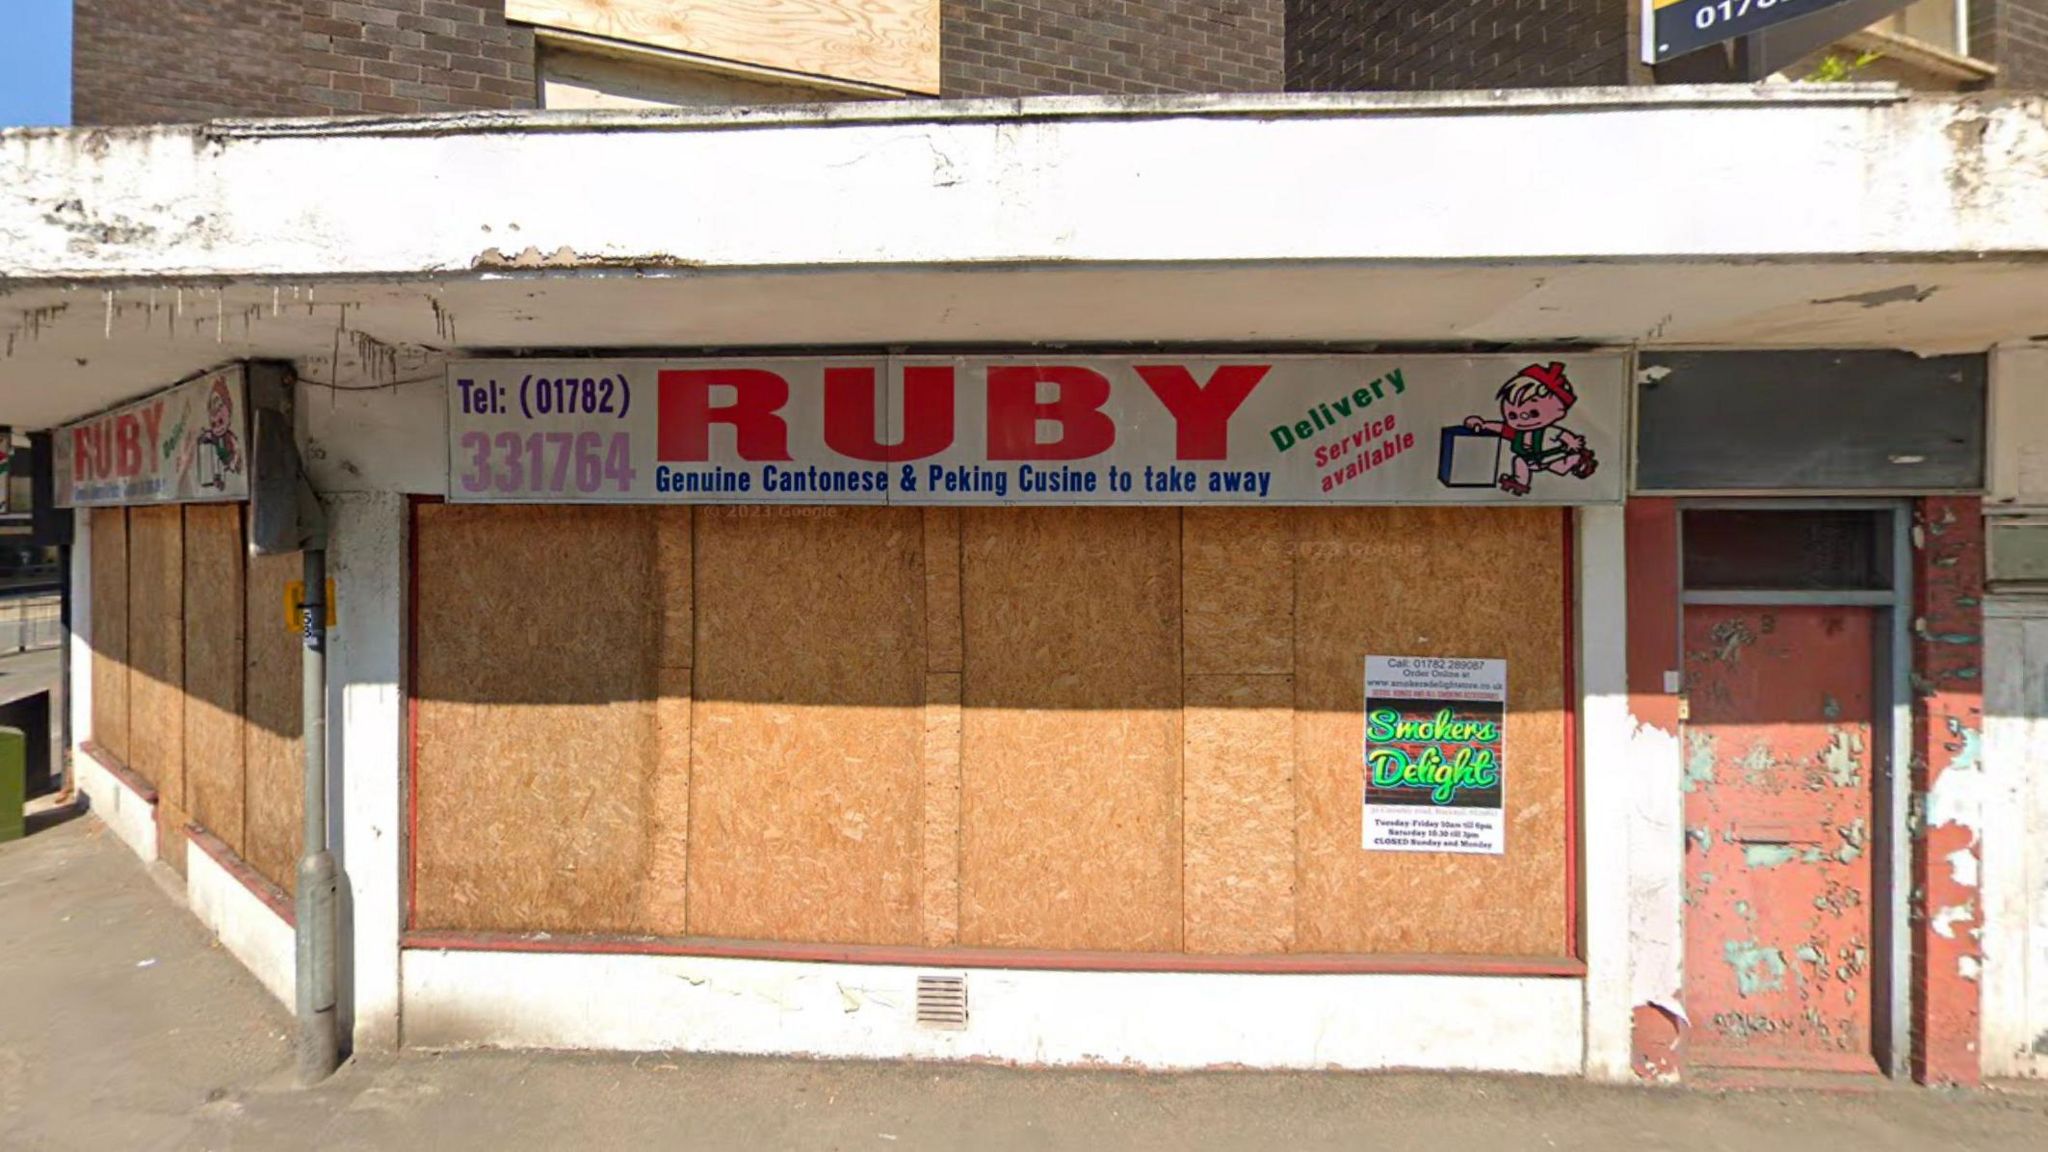 The closed down Chinese takeaway shop that housed a cannabis farm